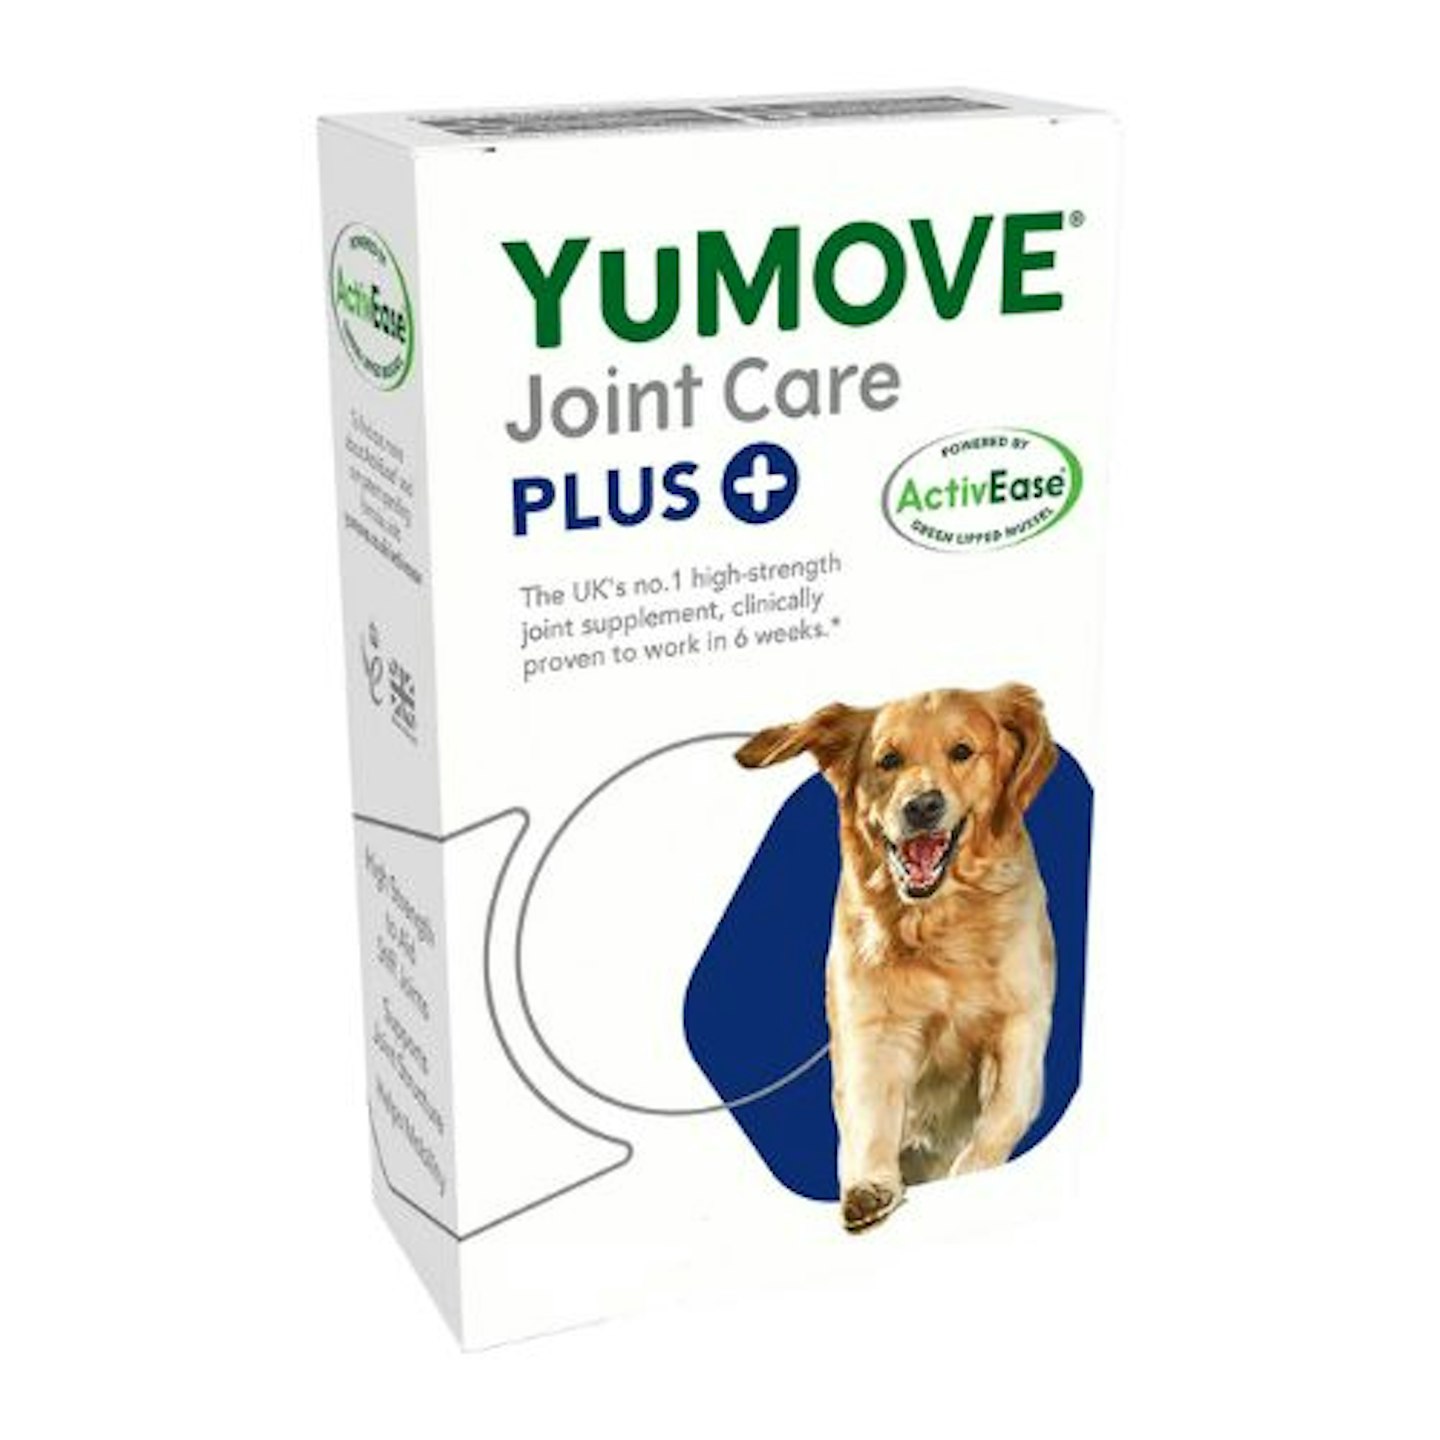 YuMOVE Joint Care PLUS for Dogs